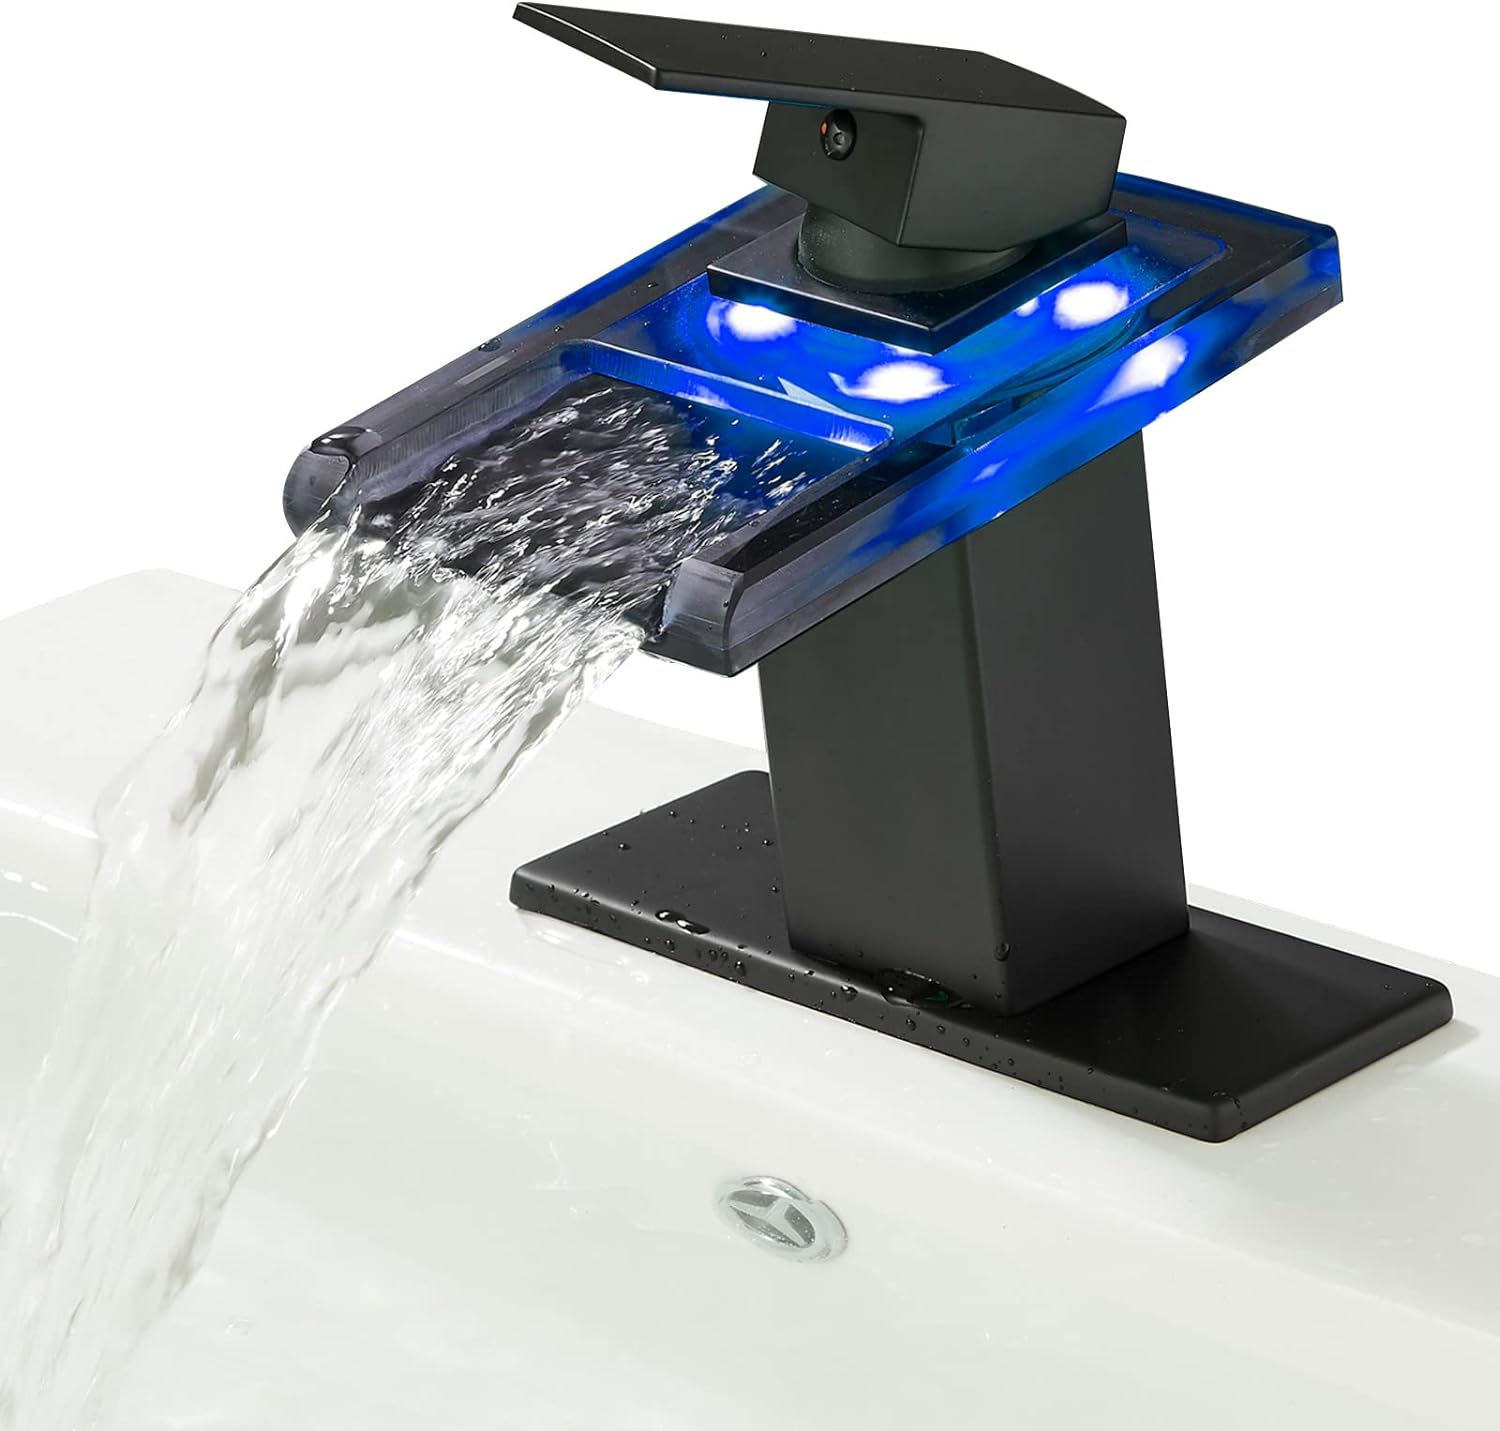 LED Bathroom Sink Faucet Matte Black, Waterfall Single Hole Handle RV Bath Vanity Faucets for Sinks 1 or 3 Holes 2 Water Supply Lines, Open Glass Spout